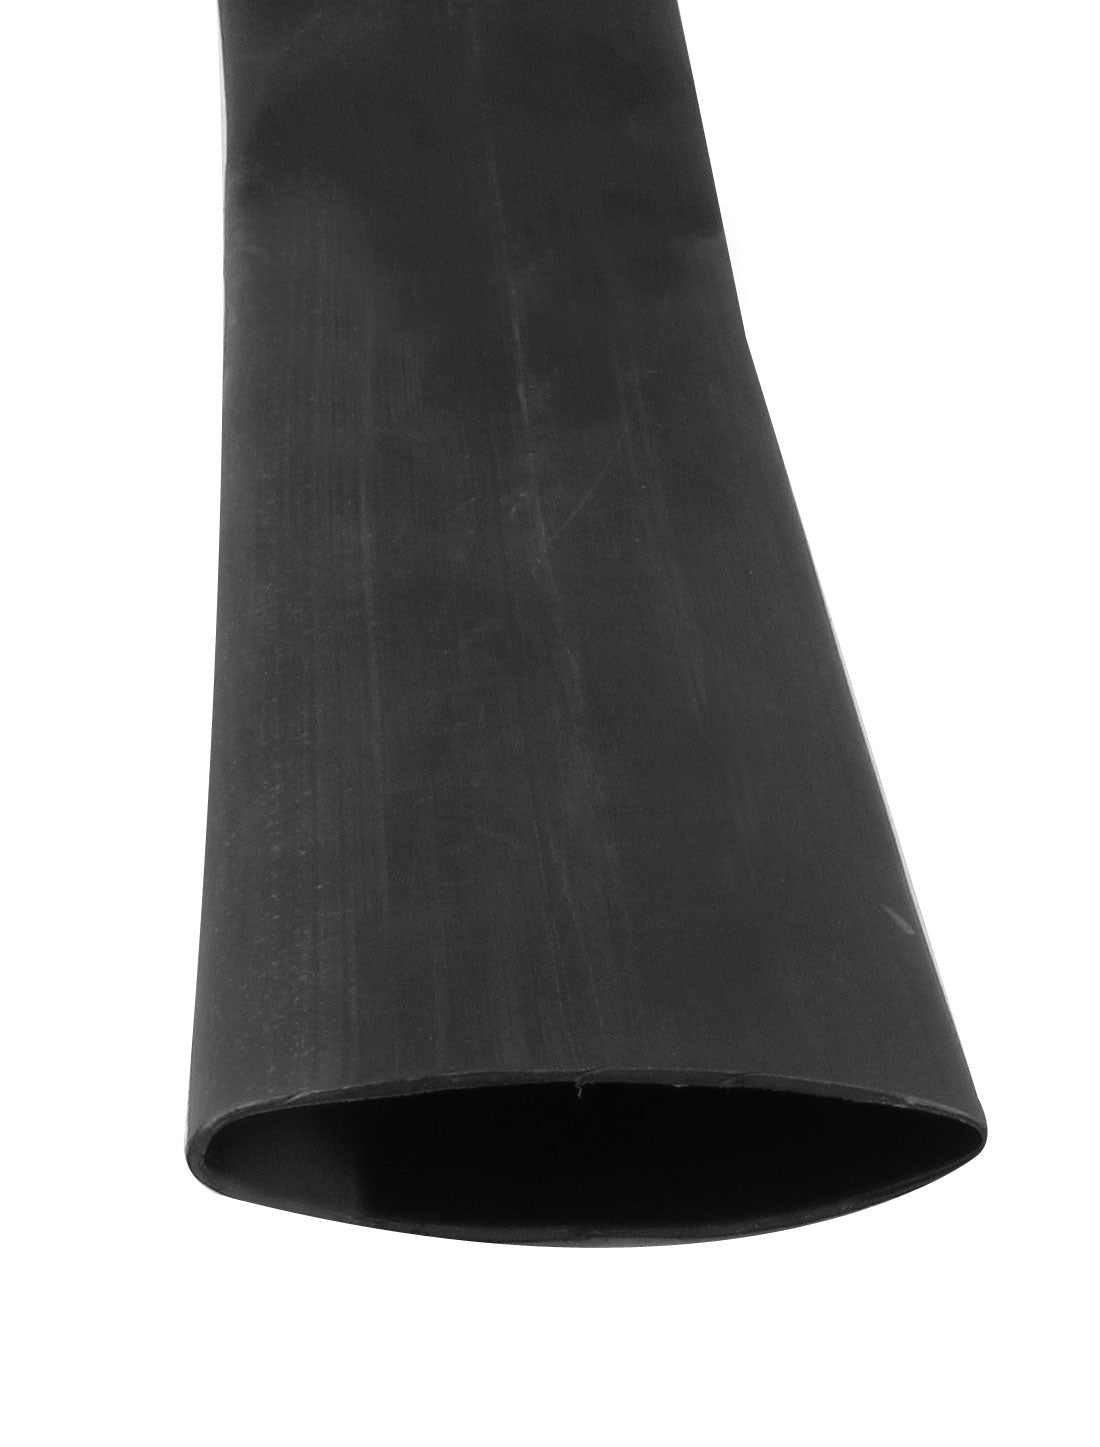 uxcell Uxcell 40mm Dia 3:1 Black Polyolefin Heat Shrink Tubing Tube Sleeving Wrap Black 1M